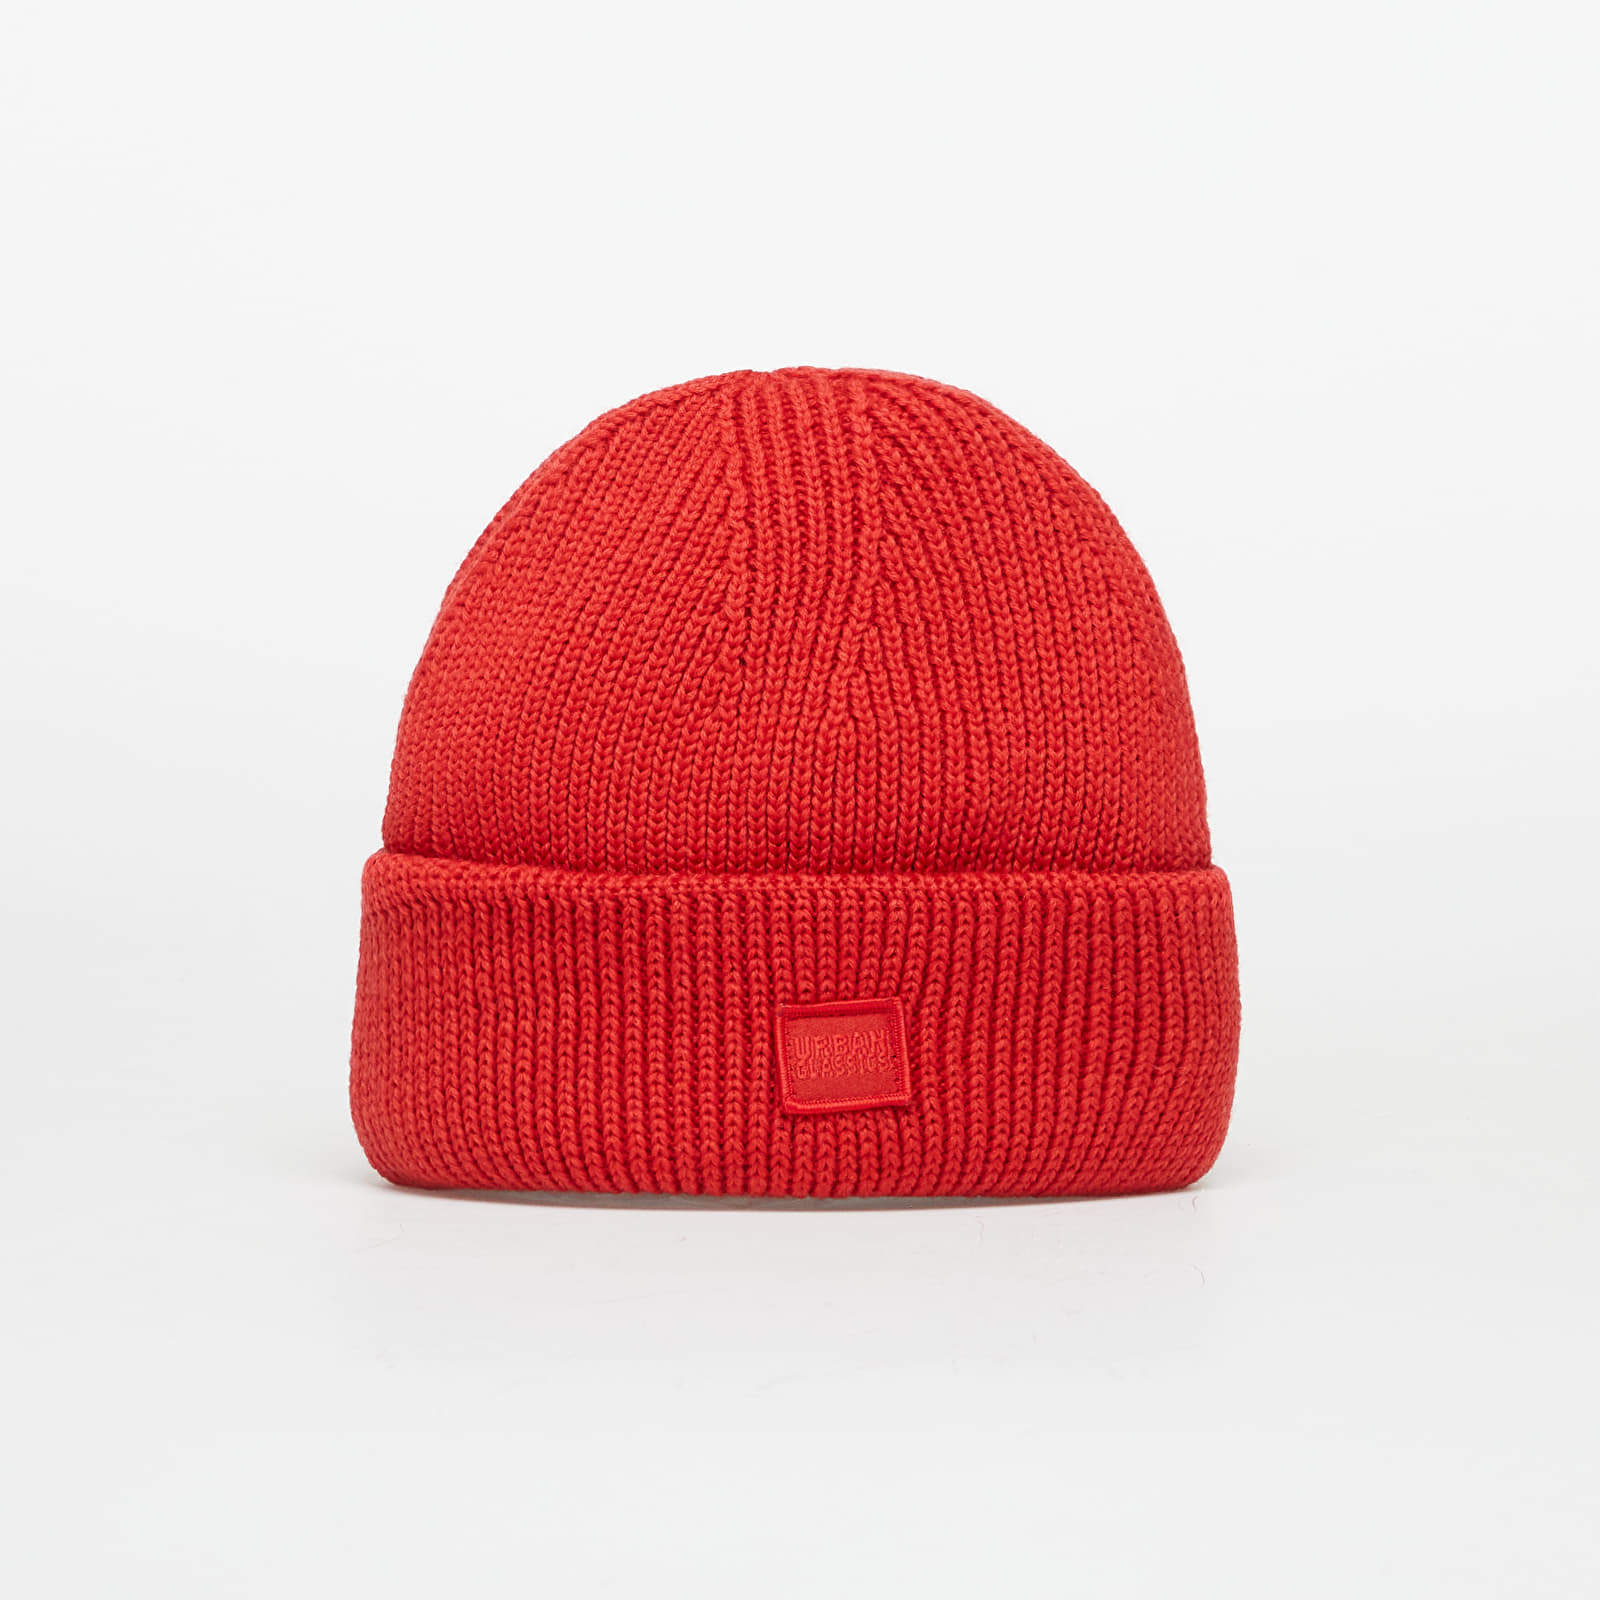 Huge Classics Urban Beanie Knitted Queens Red Hats Wool |